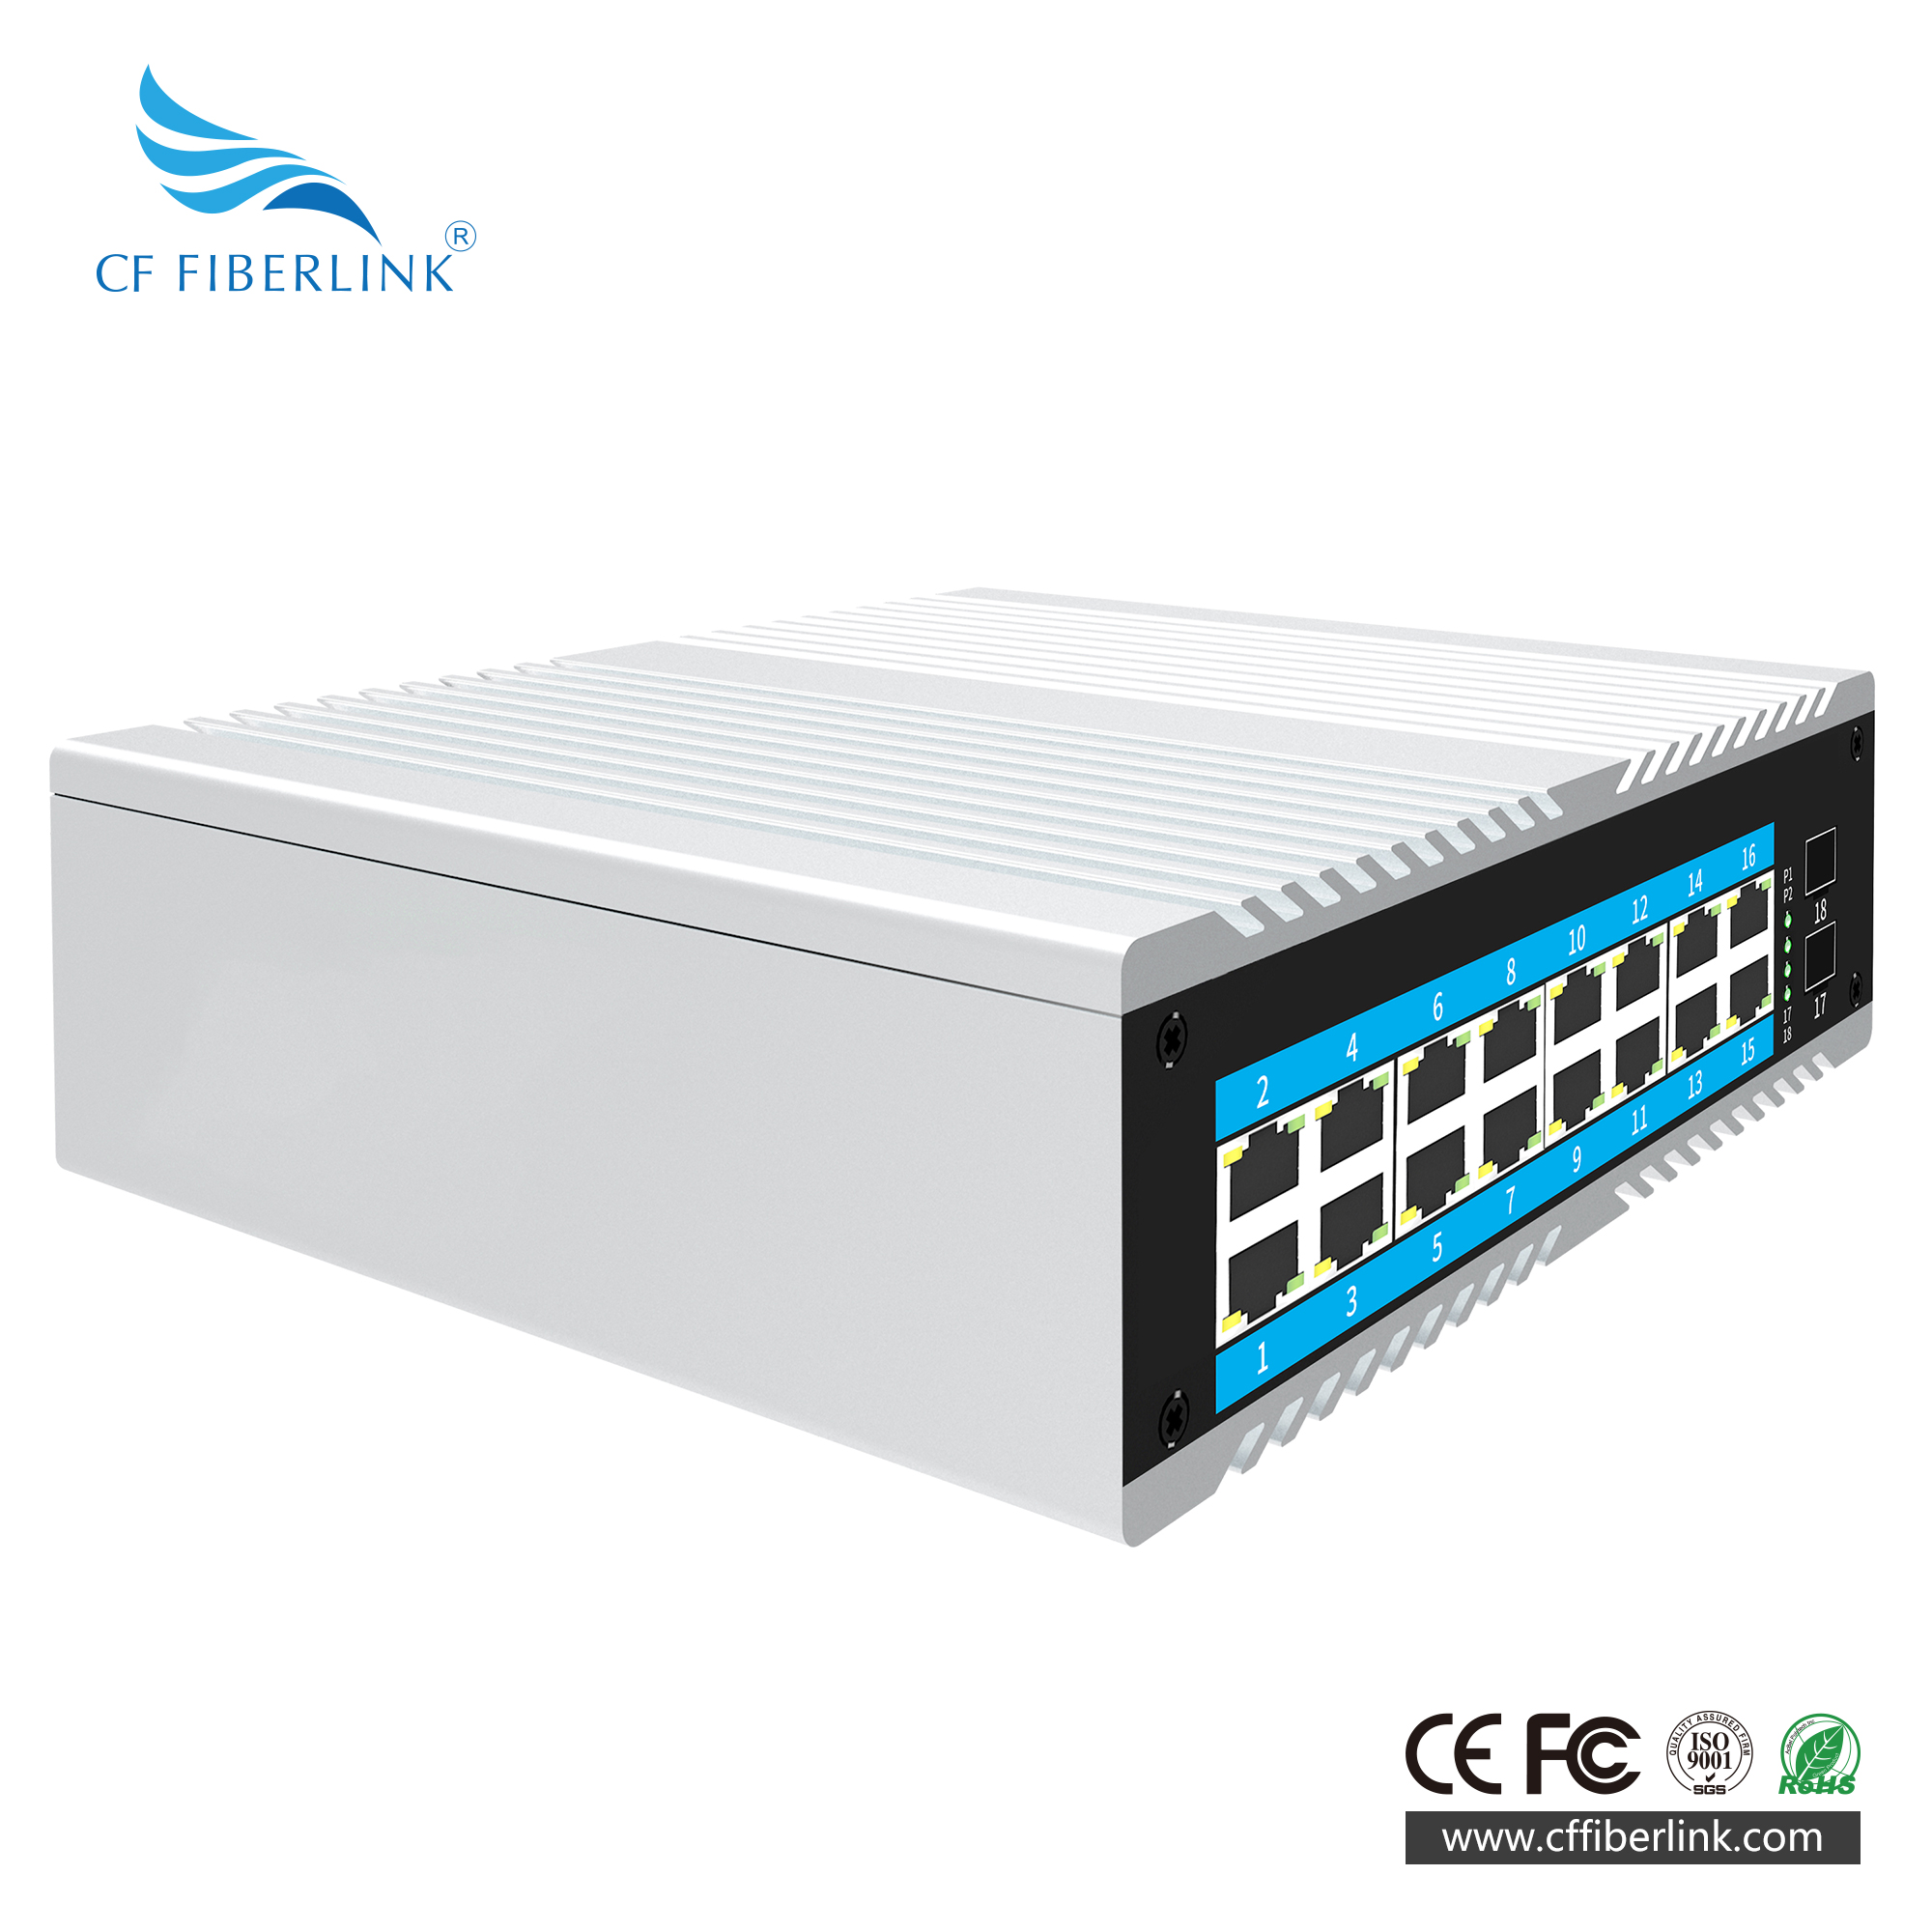 18-port 10/100M/1000M Industrial Ethernet Switch